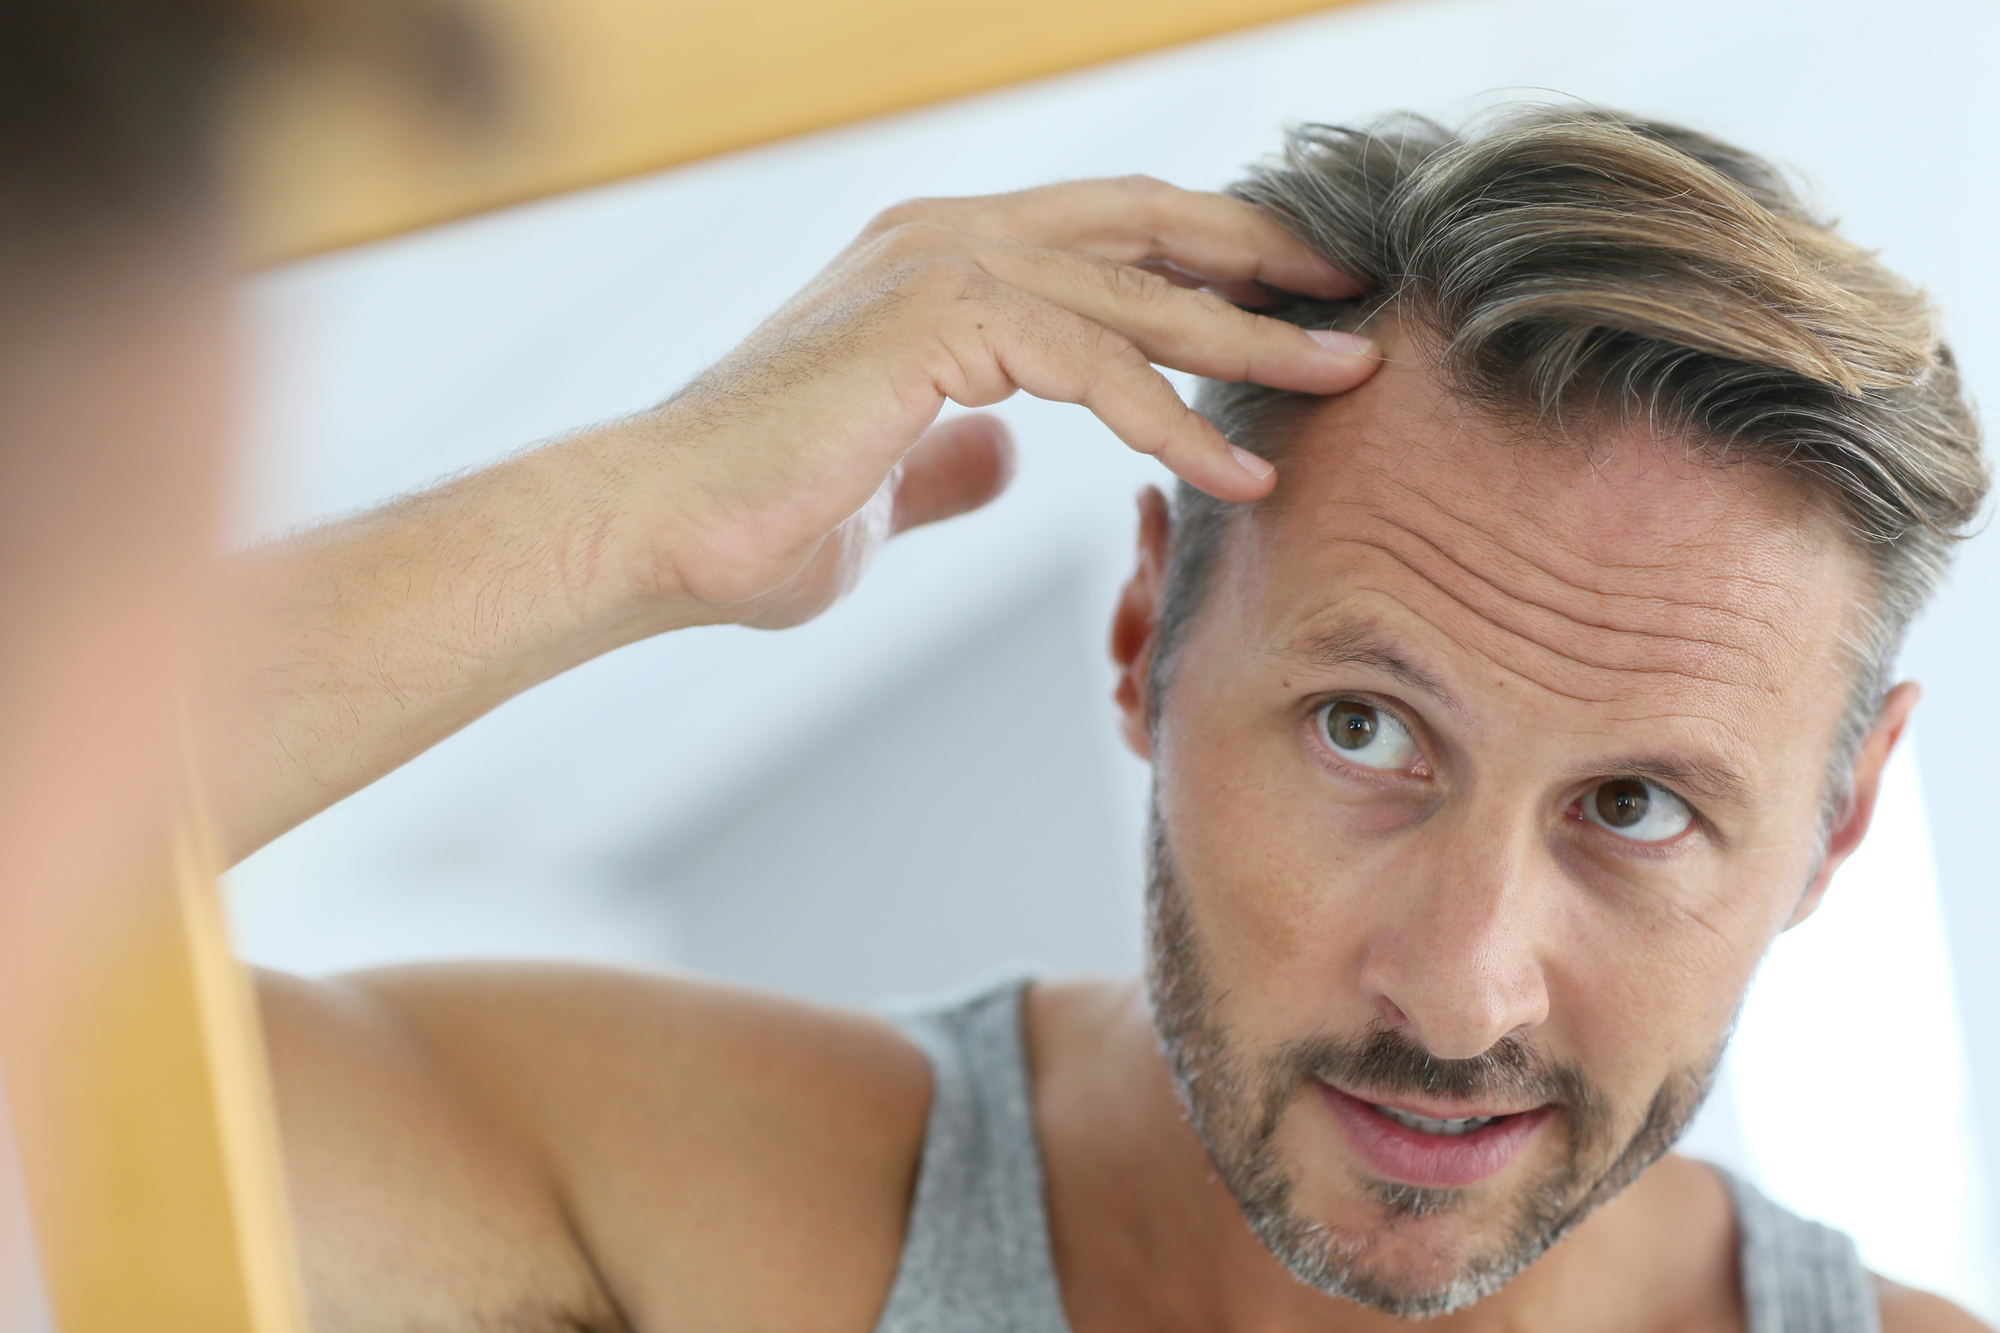 You are currently viewing What is Involved with Follicular Unit Excision (FUE) Hair Treatment?